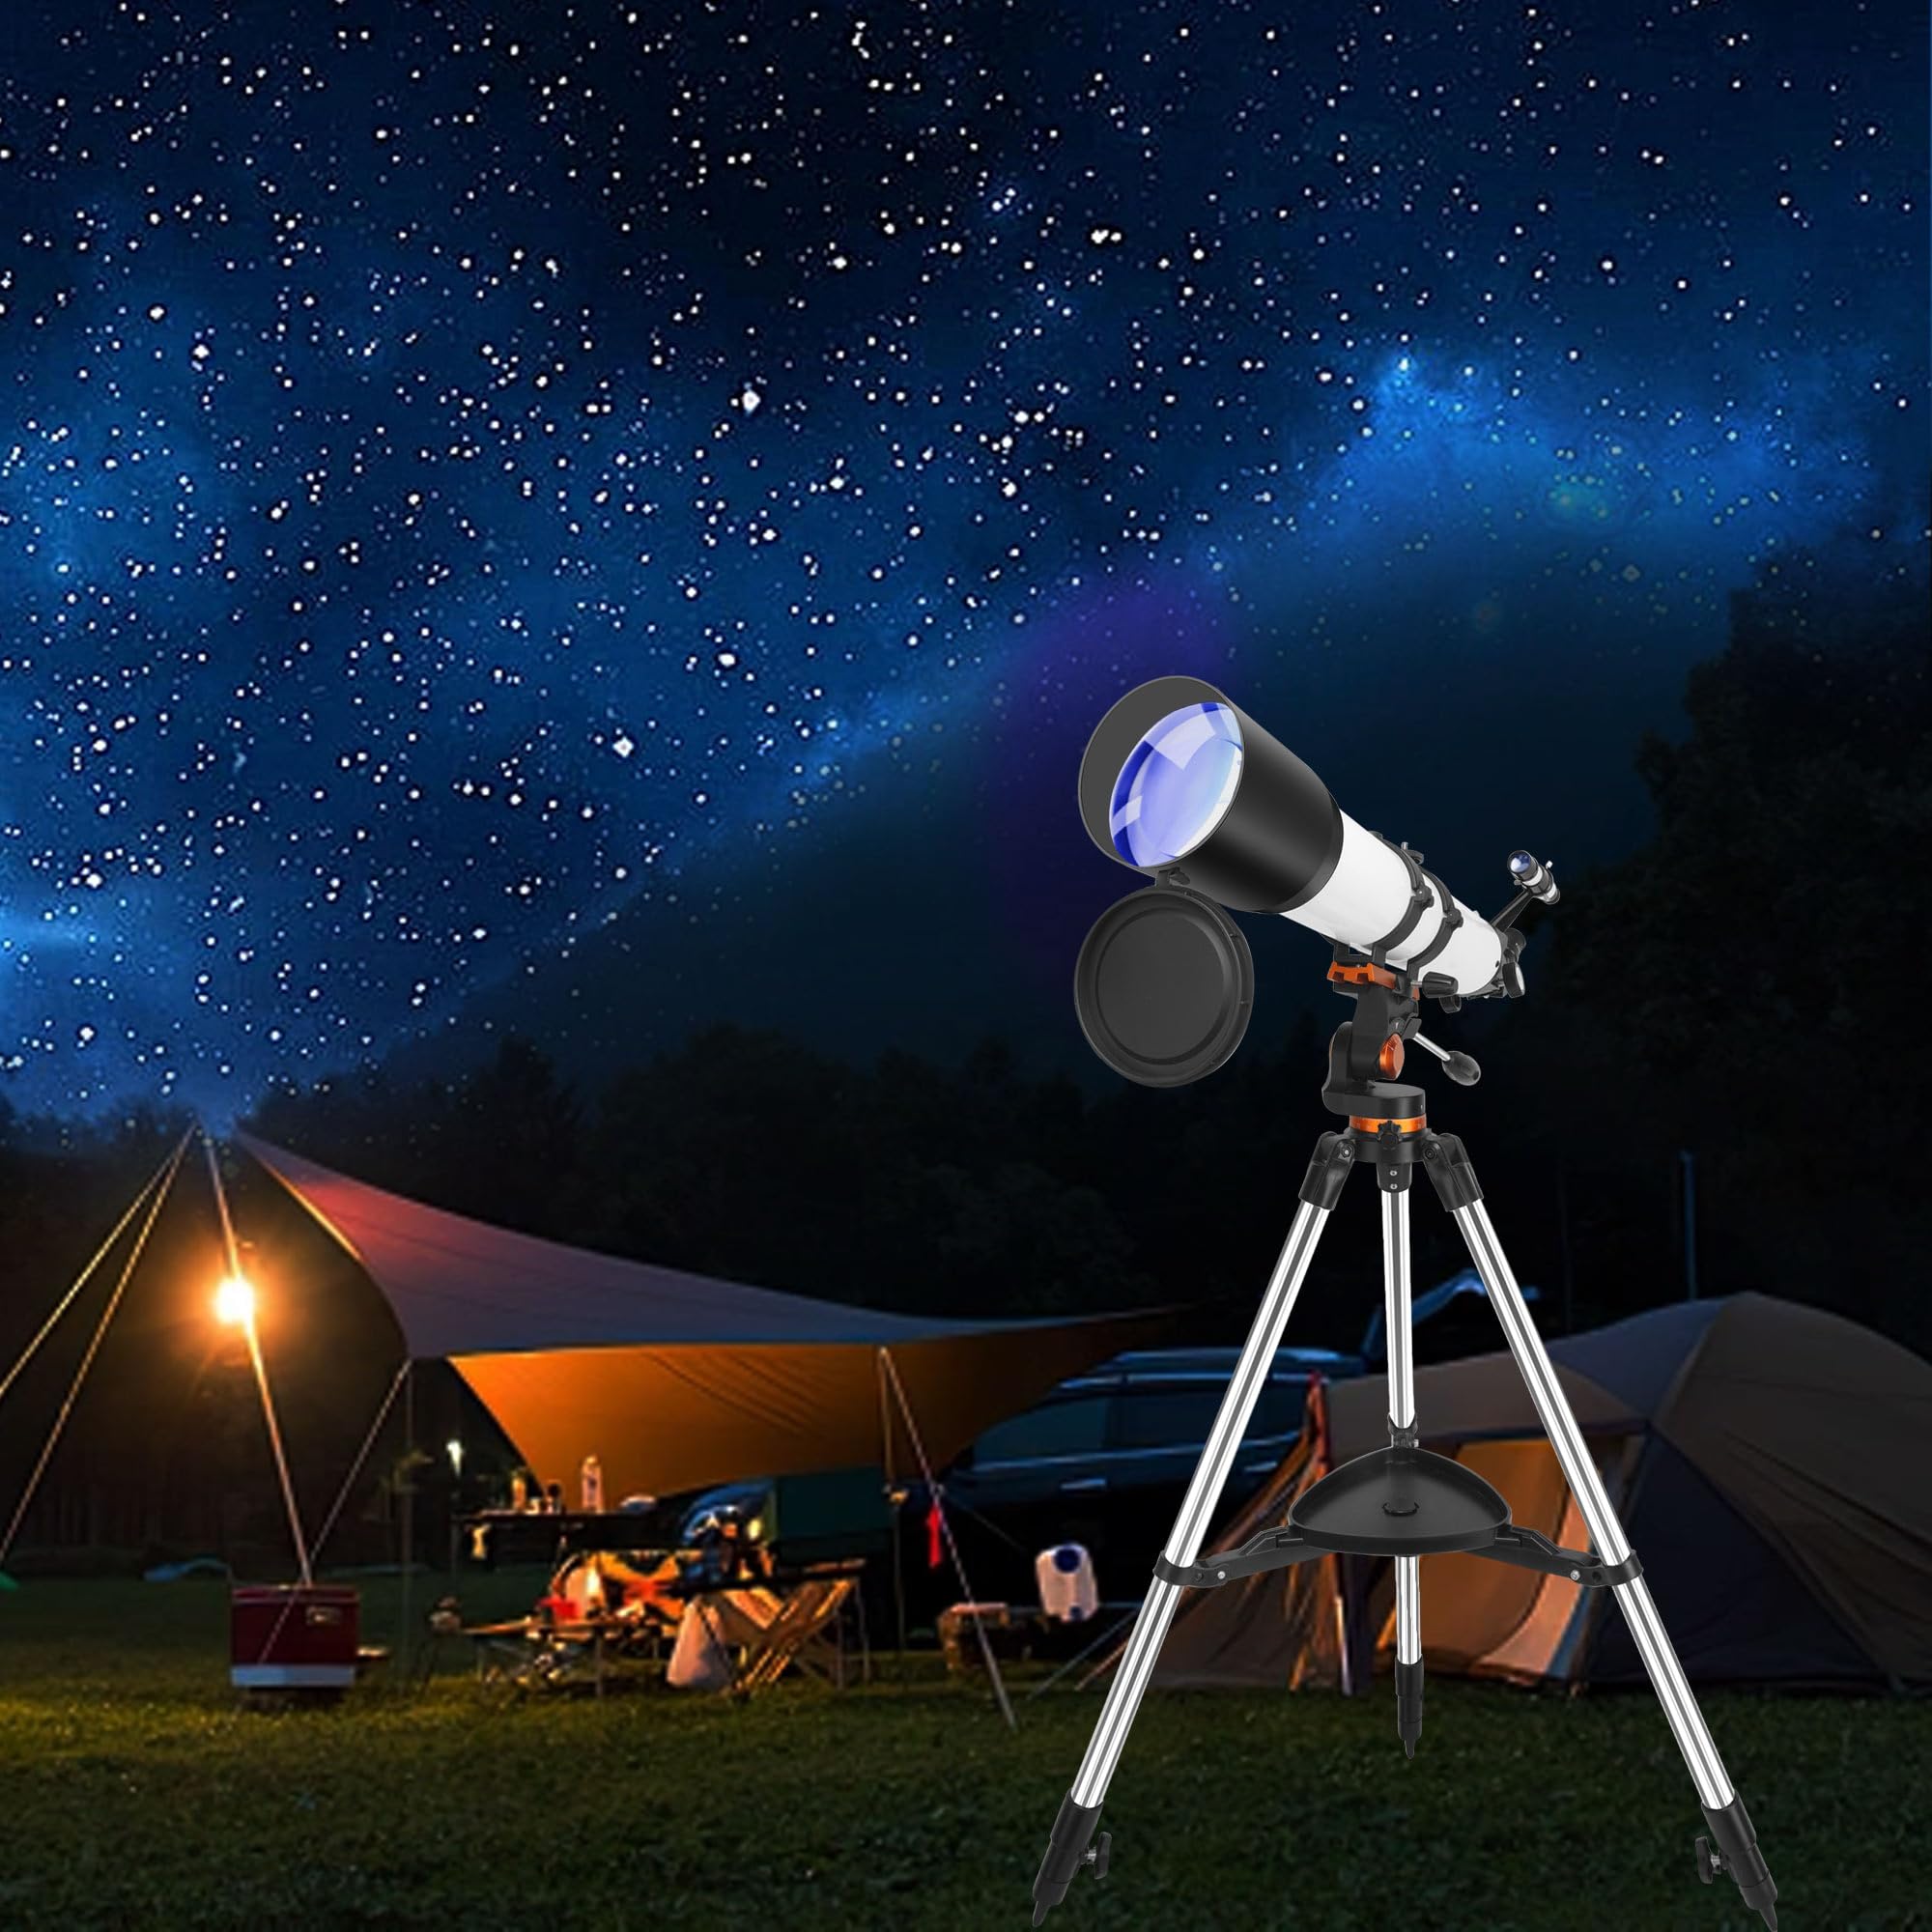 HAWKKO Telescopes, 90mm Aperture Telescope for Adults Astronomy, 700mm Refracting Telescope Fully Multi-Coated High Transmission Coatings with AZ Mount Tripod Phone Adapter Viewing Planets and Stars